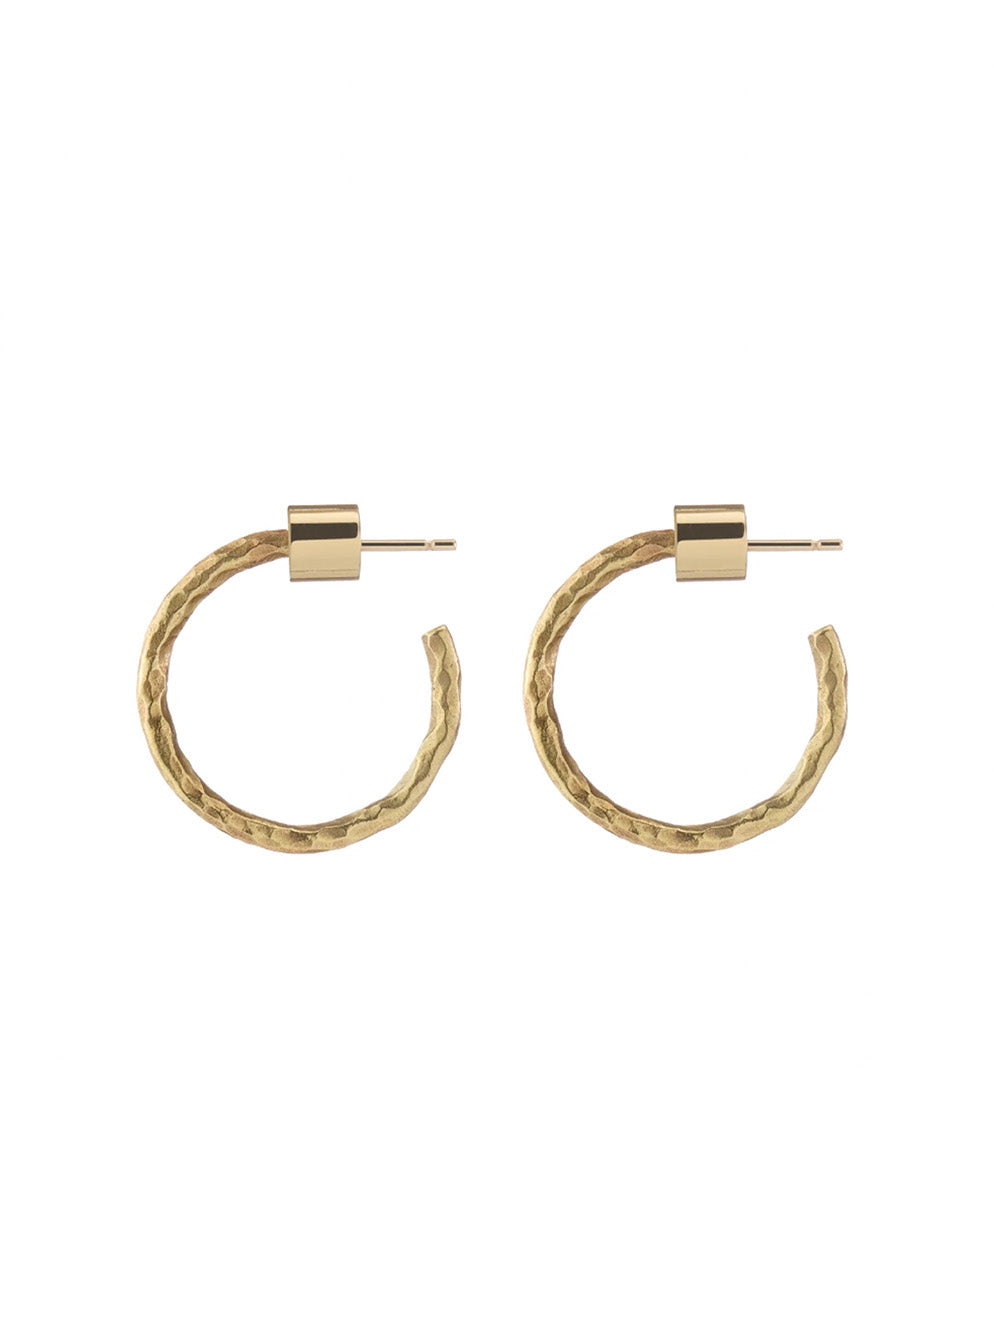 Sarah Huggie Hoops in 10K Yellow Gold Plated Brass